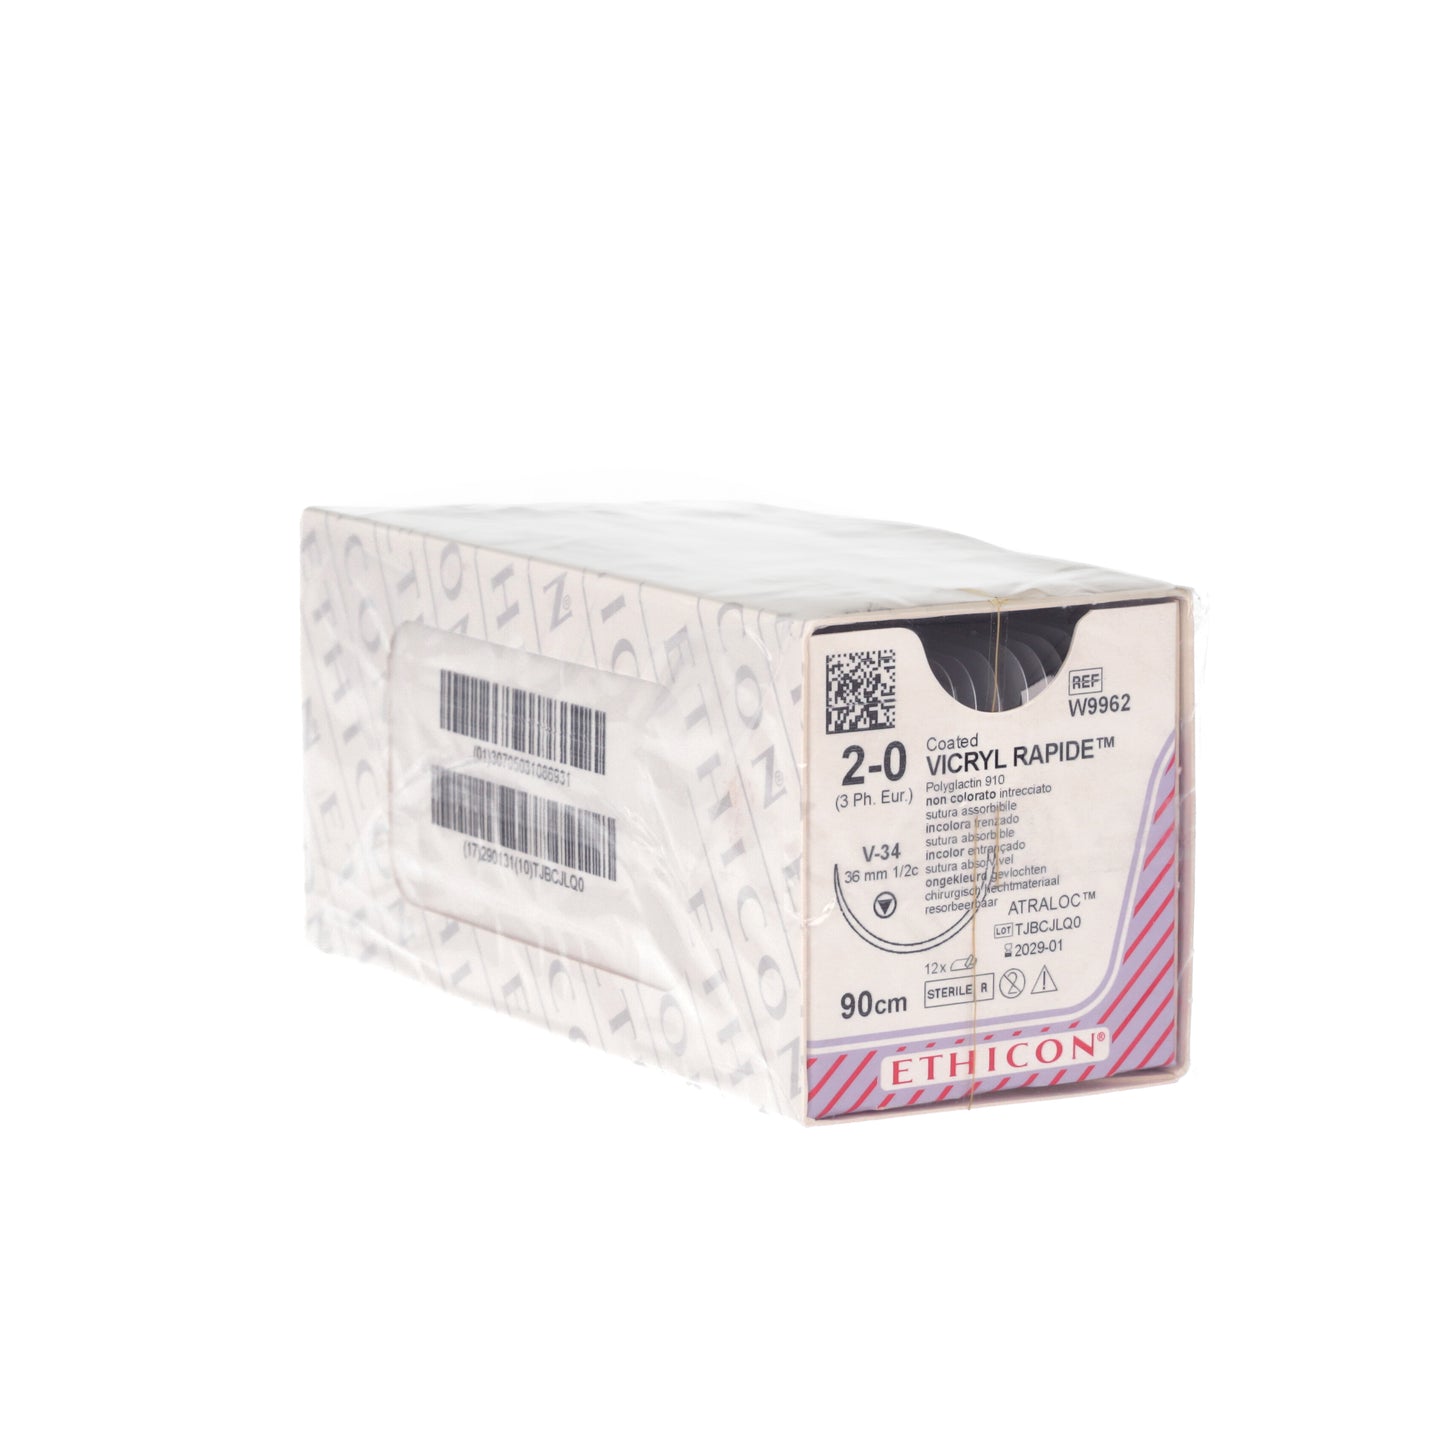 Coated VICRYL rapide Suture: 36mm 90cm undyed 2-0 3 (x12)